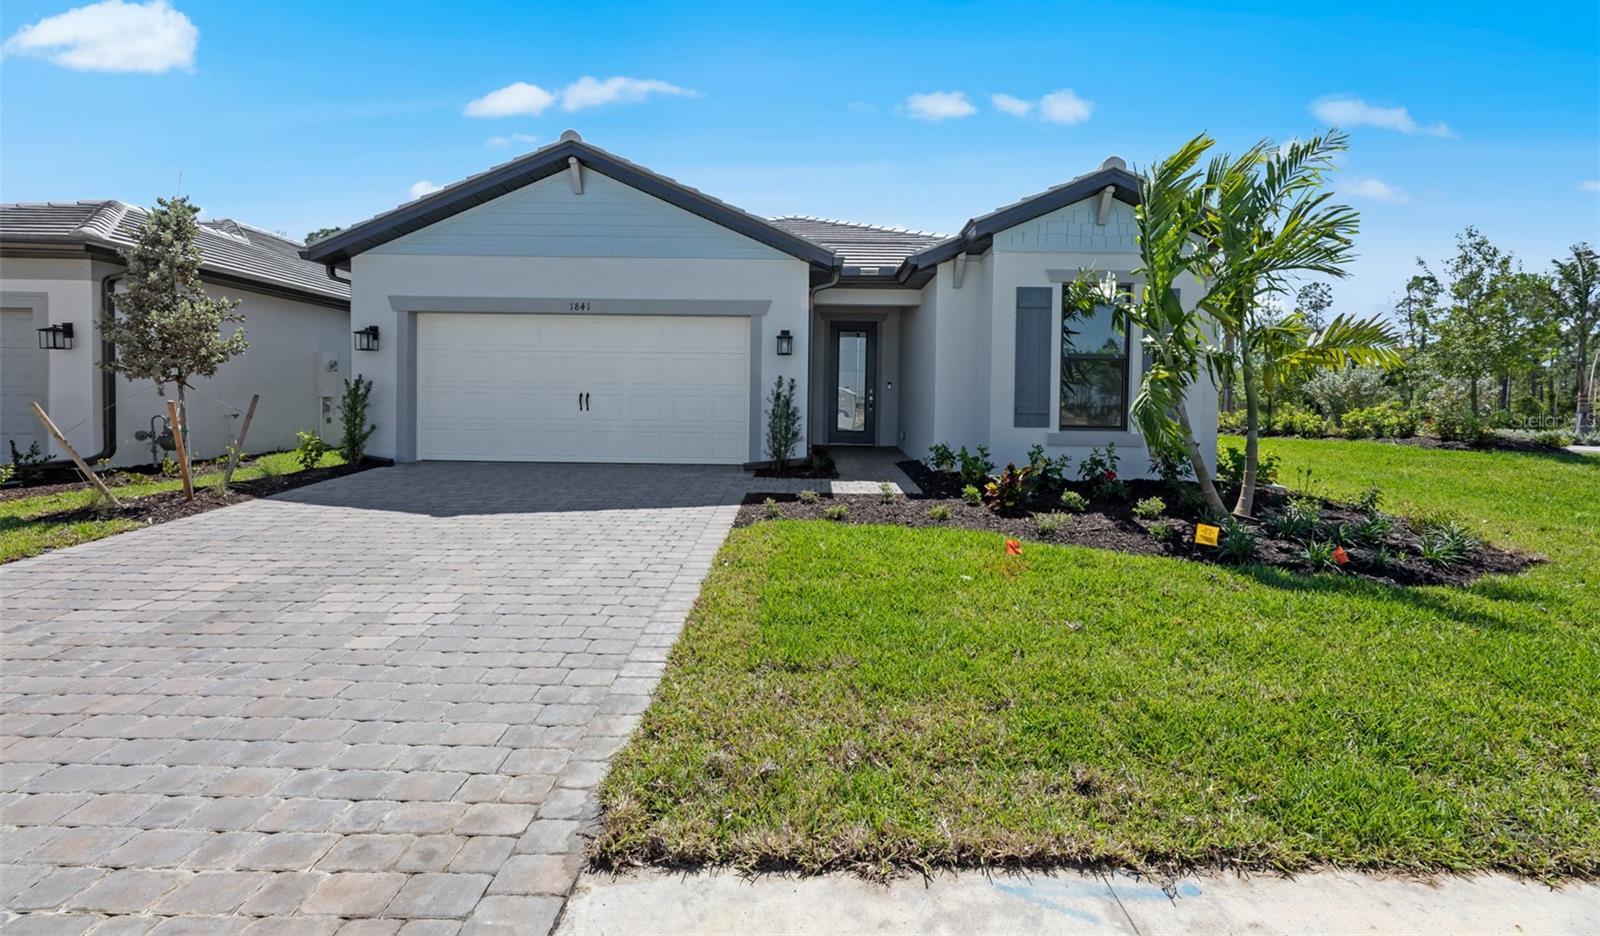 Photo one of 1841 Pepper Grass Dr North Port FL 34289 | MLS T3521488